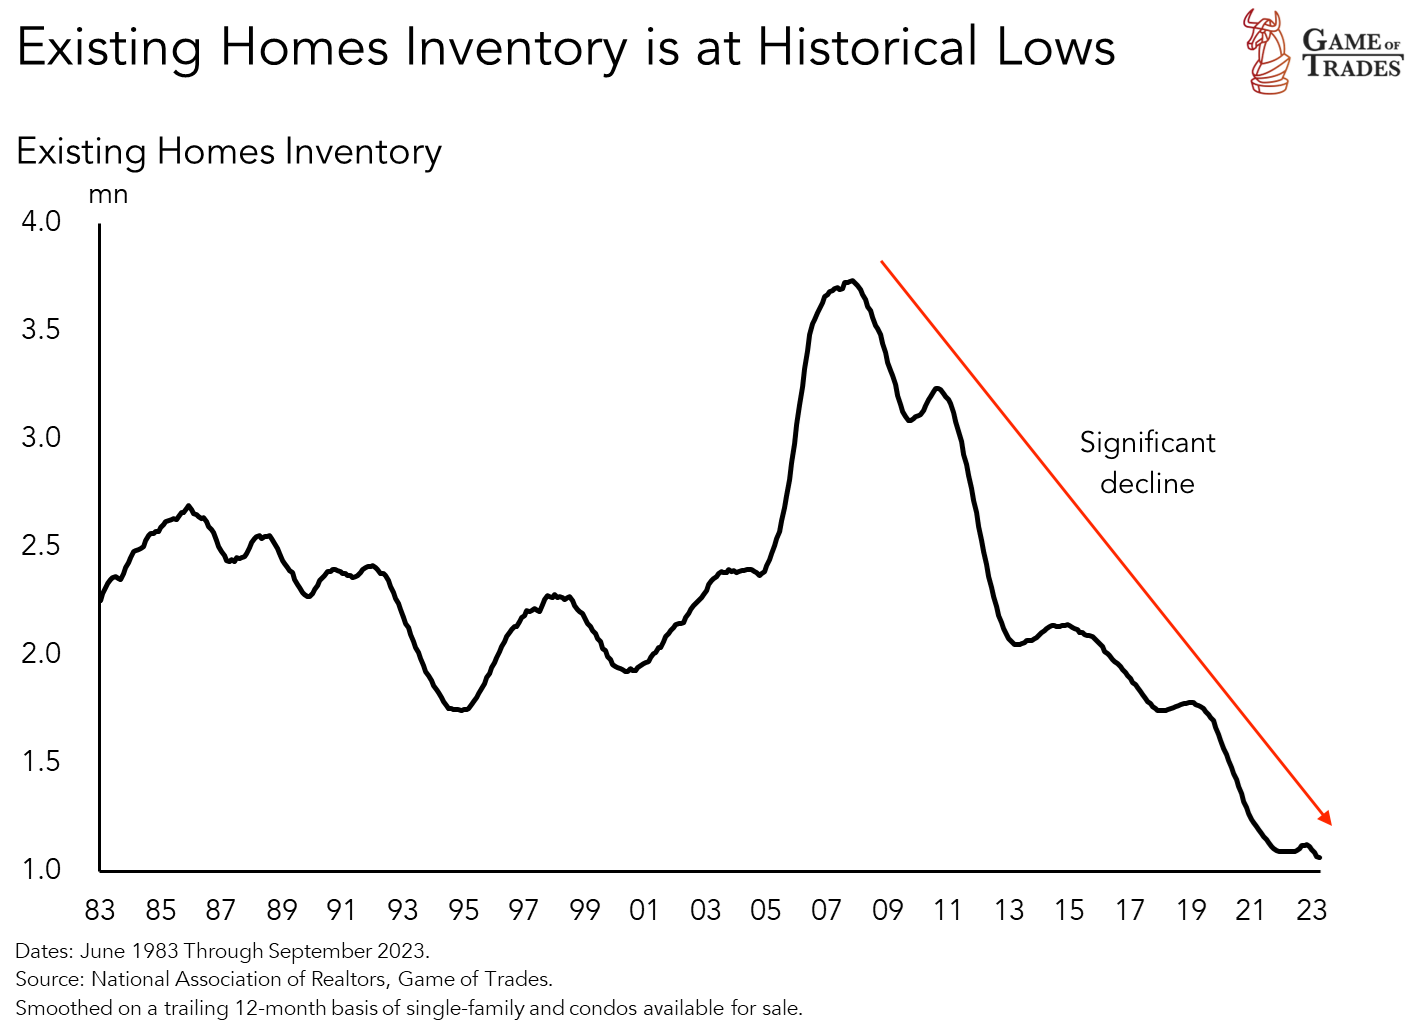 Existing homes inventory